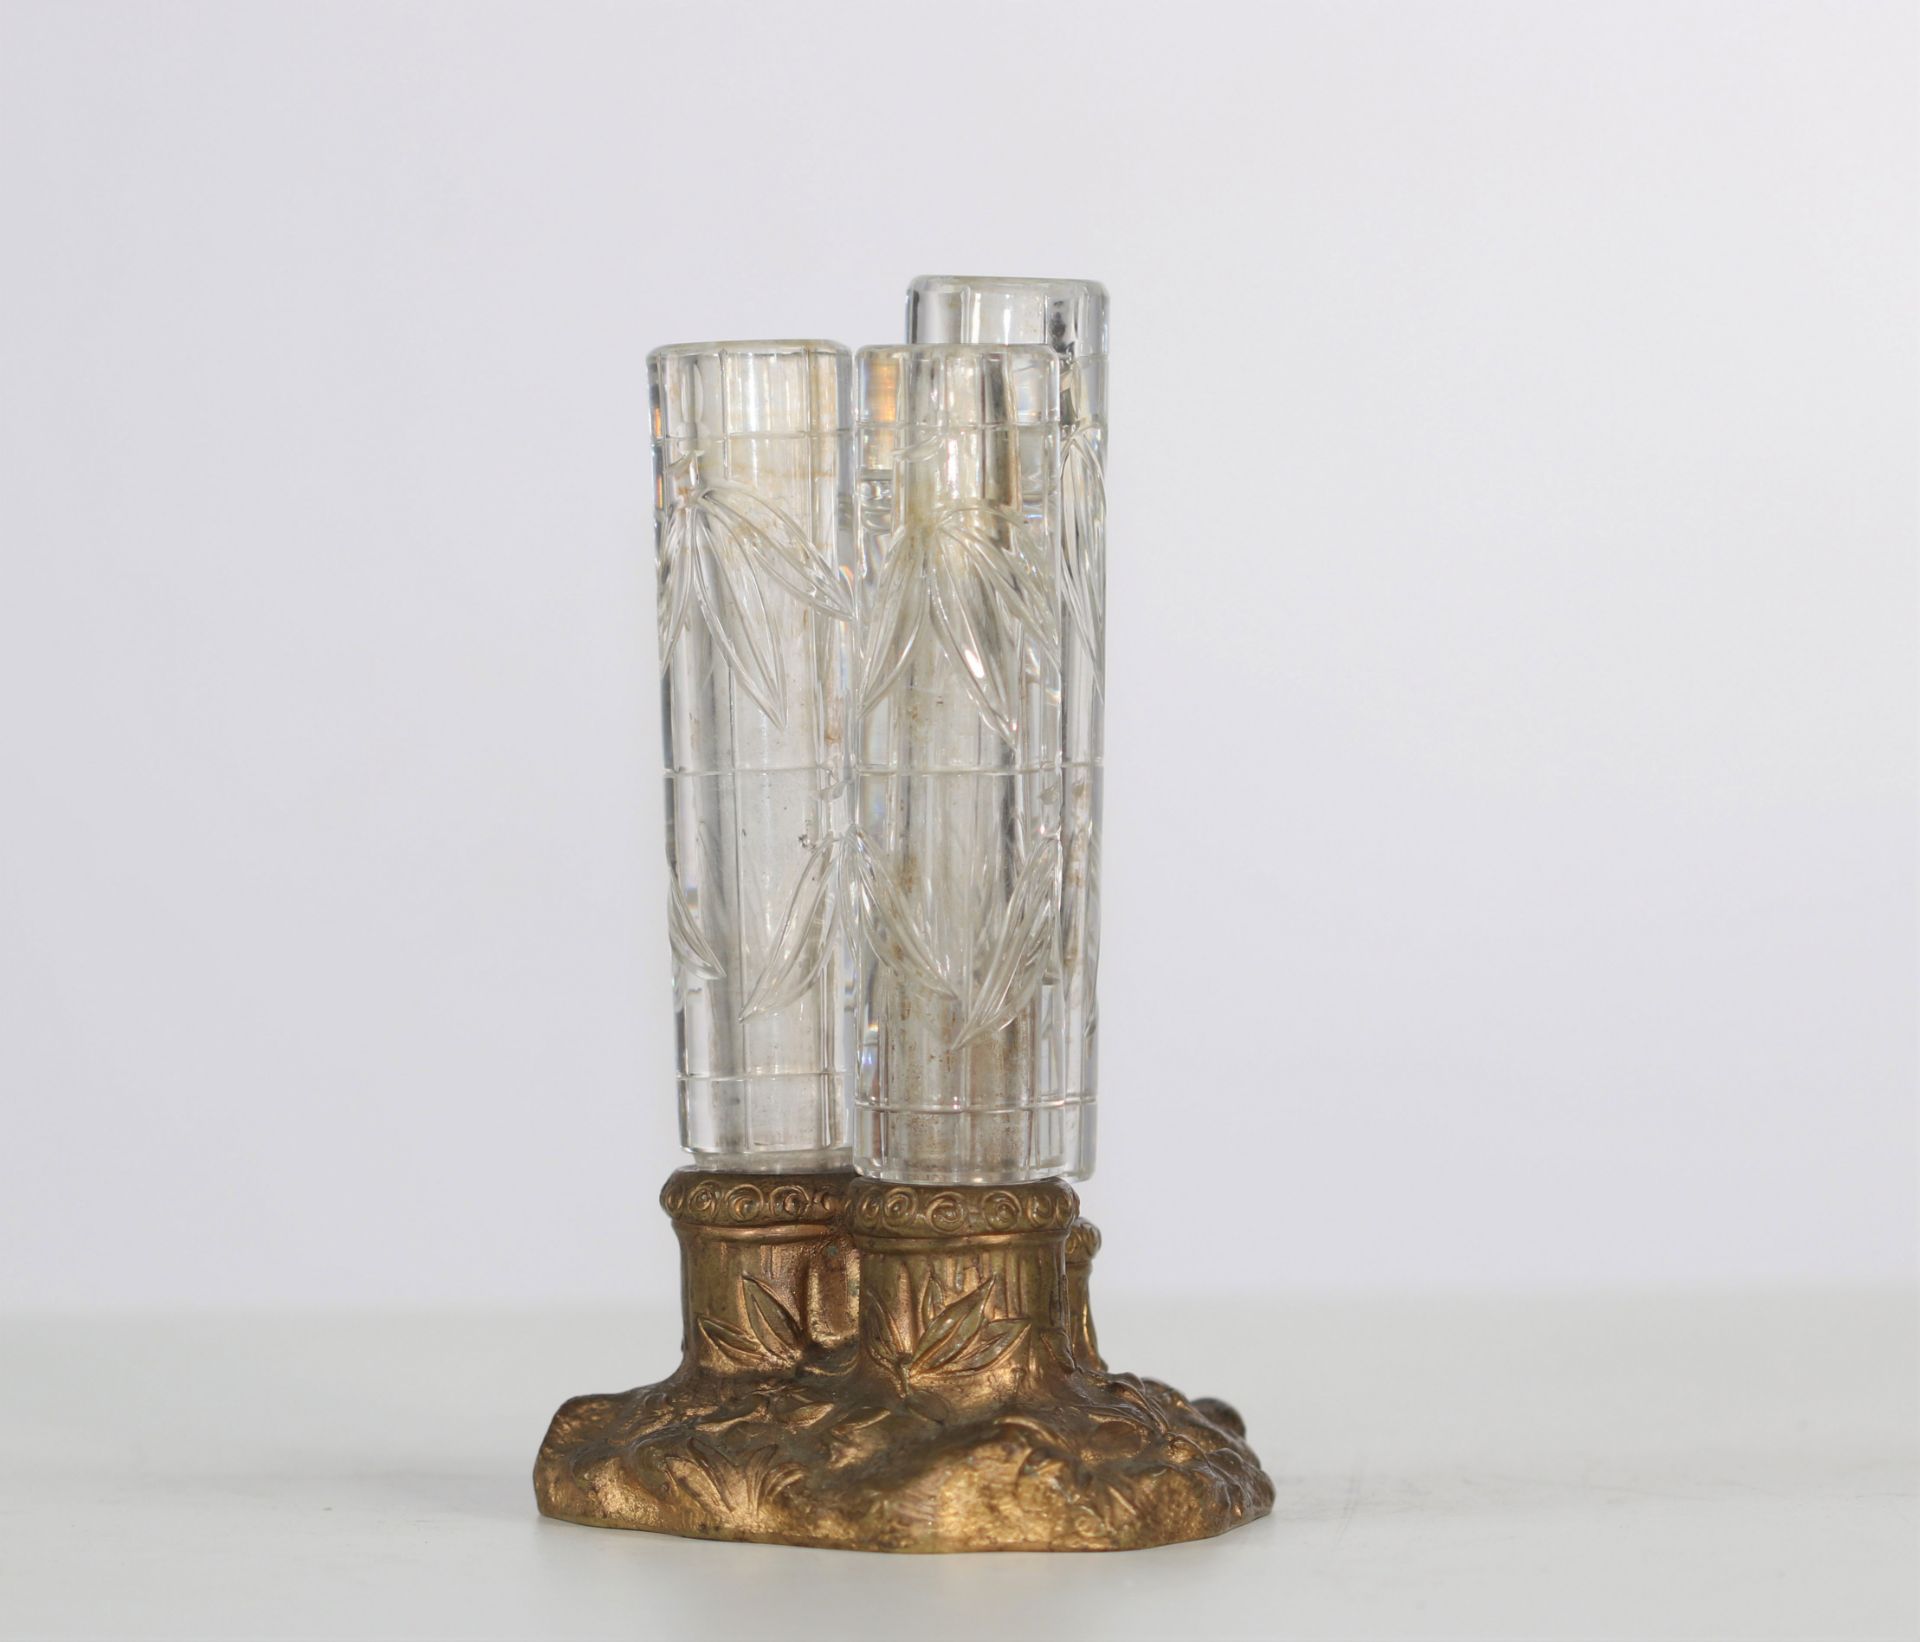 Japanese crystal vase, Baccarat, France, Crystal staircase, late 19th century